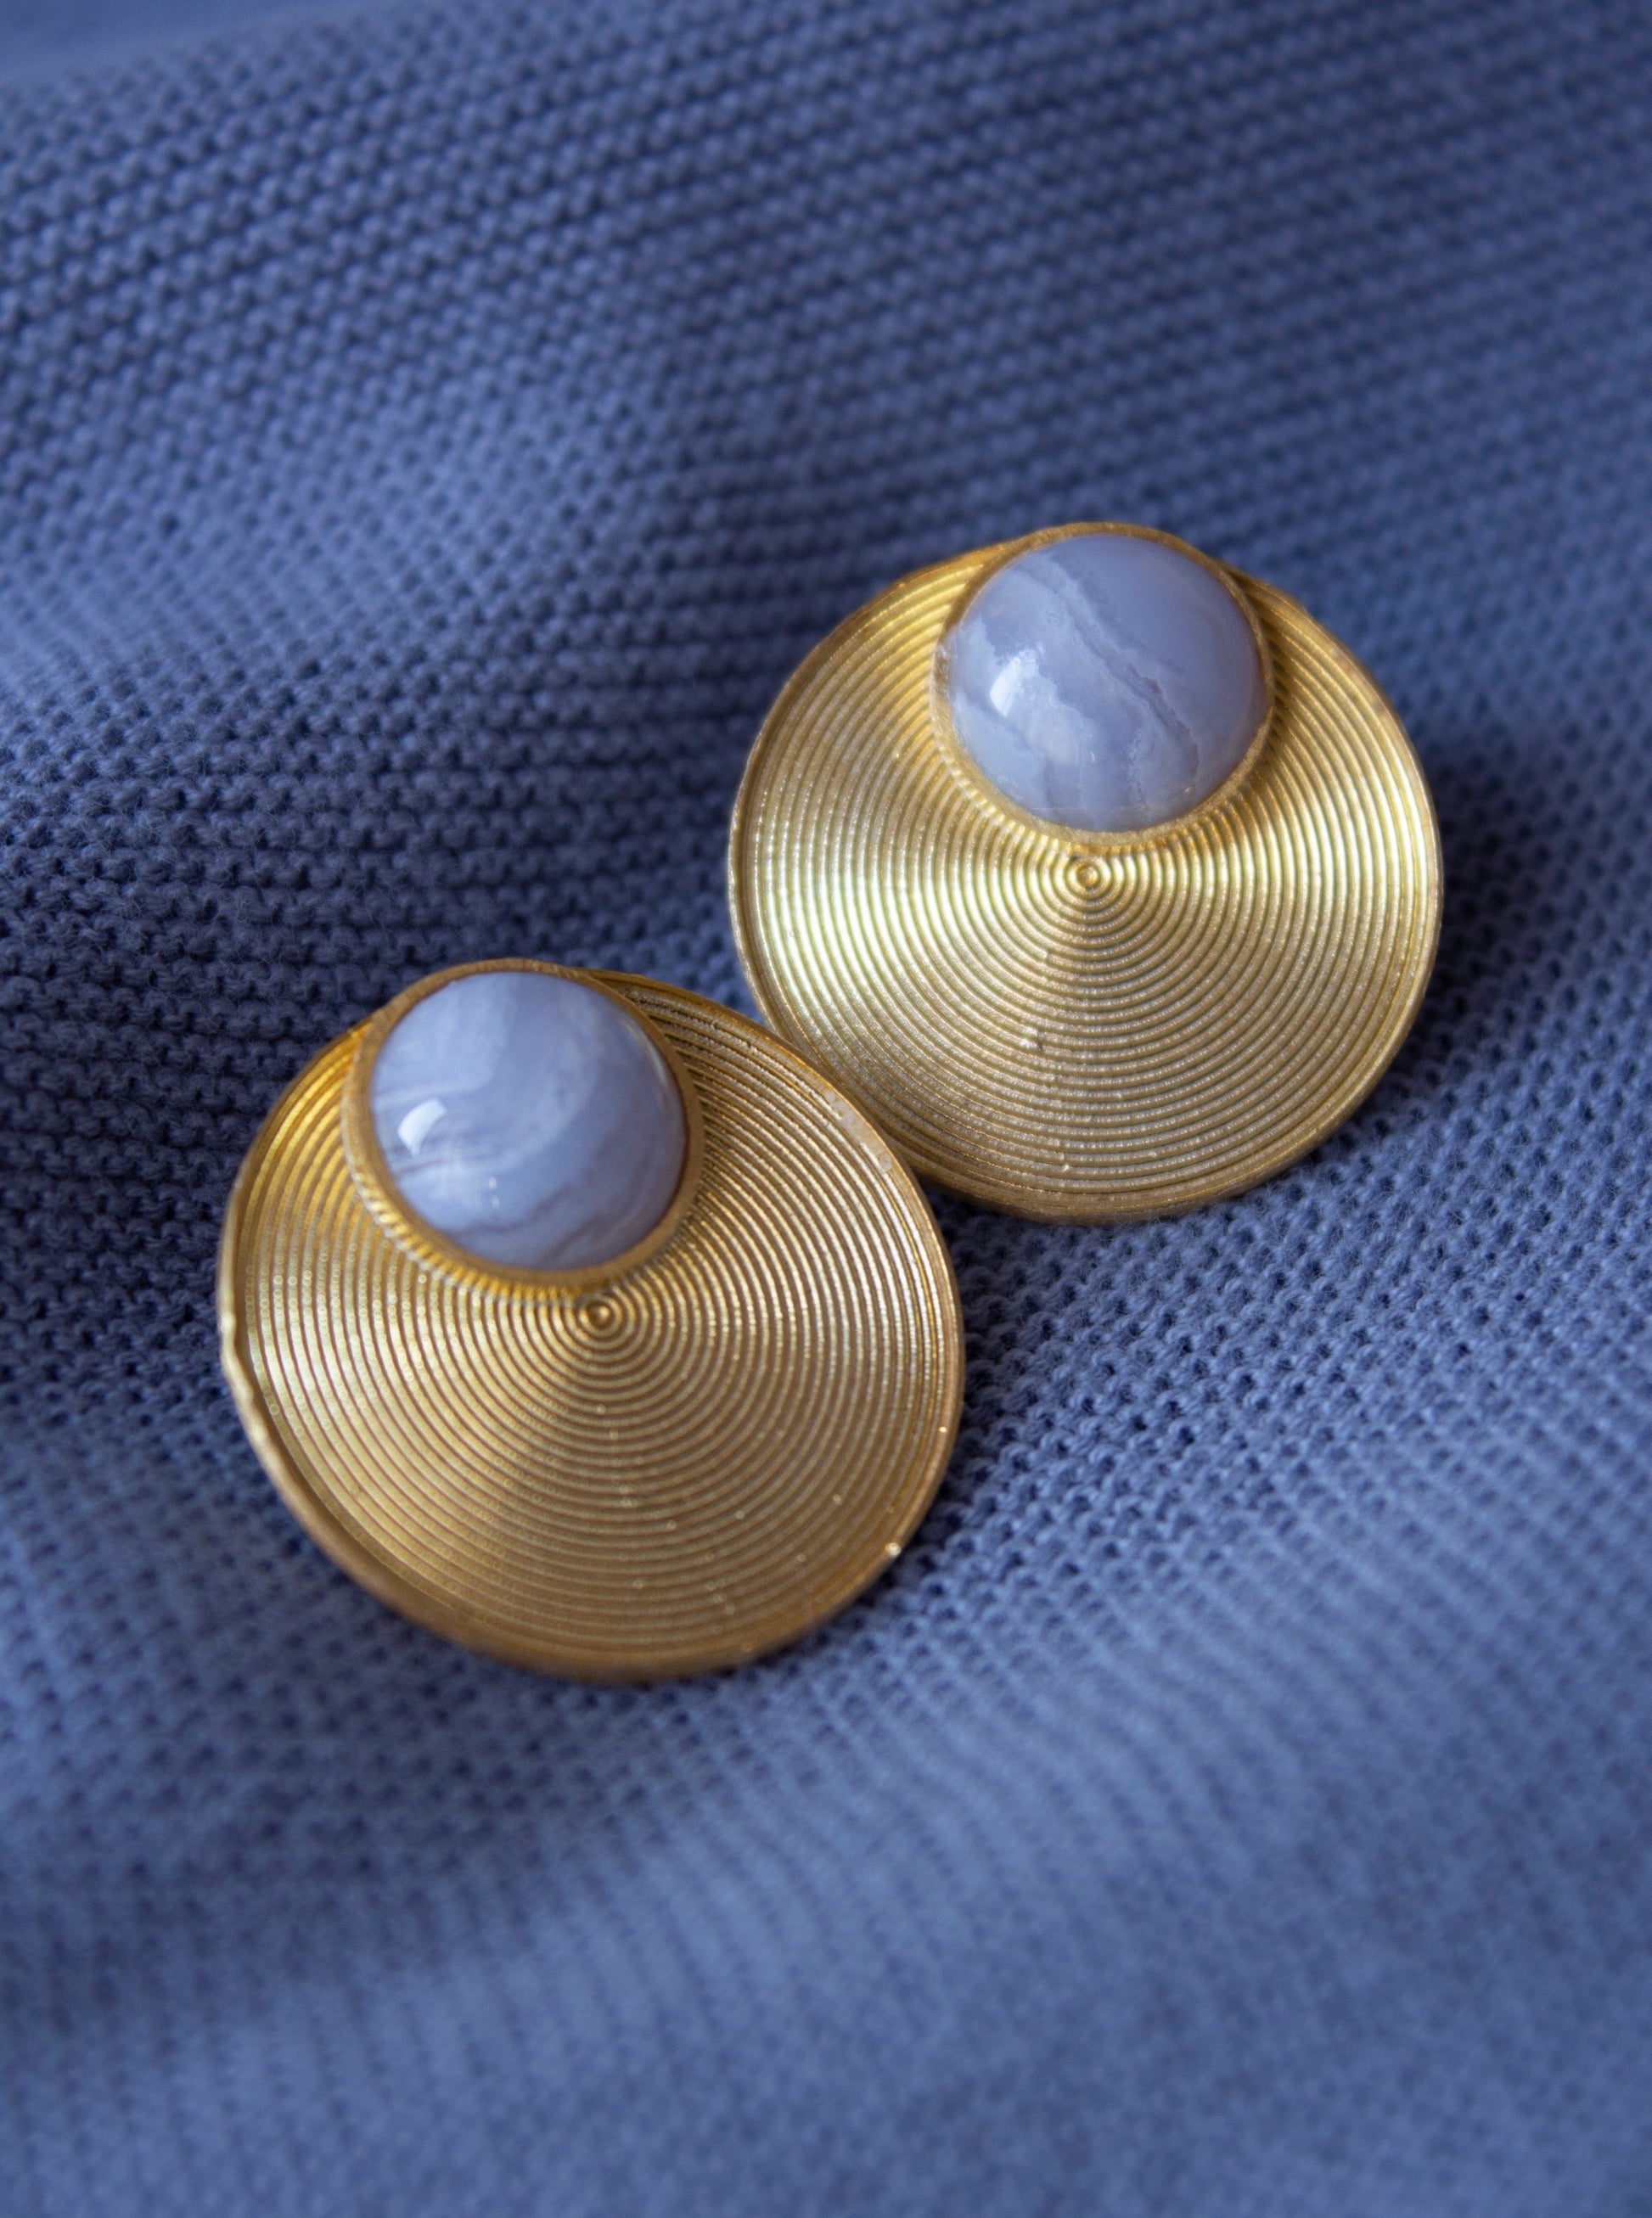 Gold earrings with calcedonia gemstone